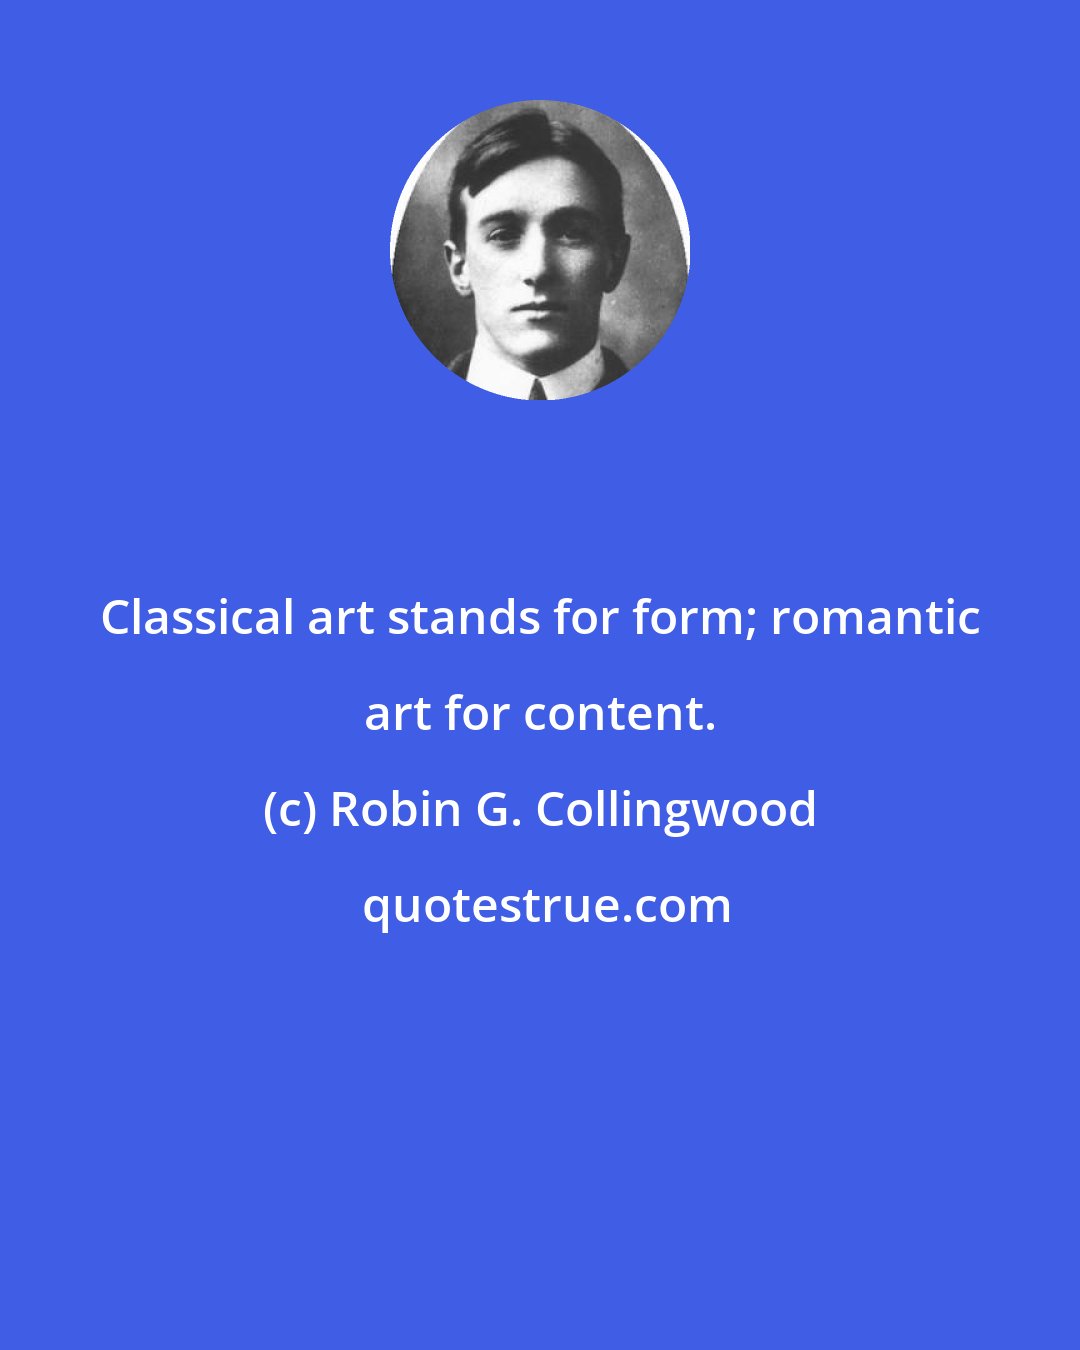 Robin G. Collingwood: Classical art stands for form; romantic art for content.